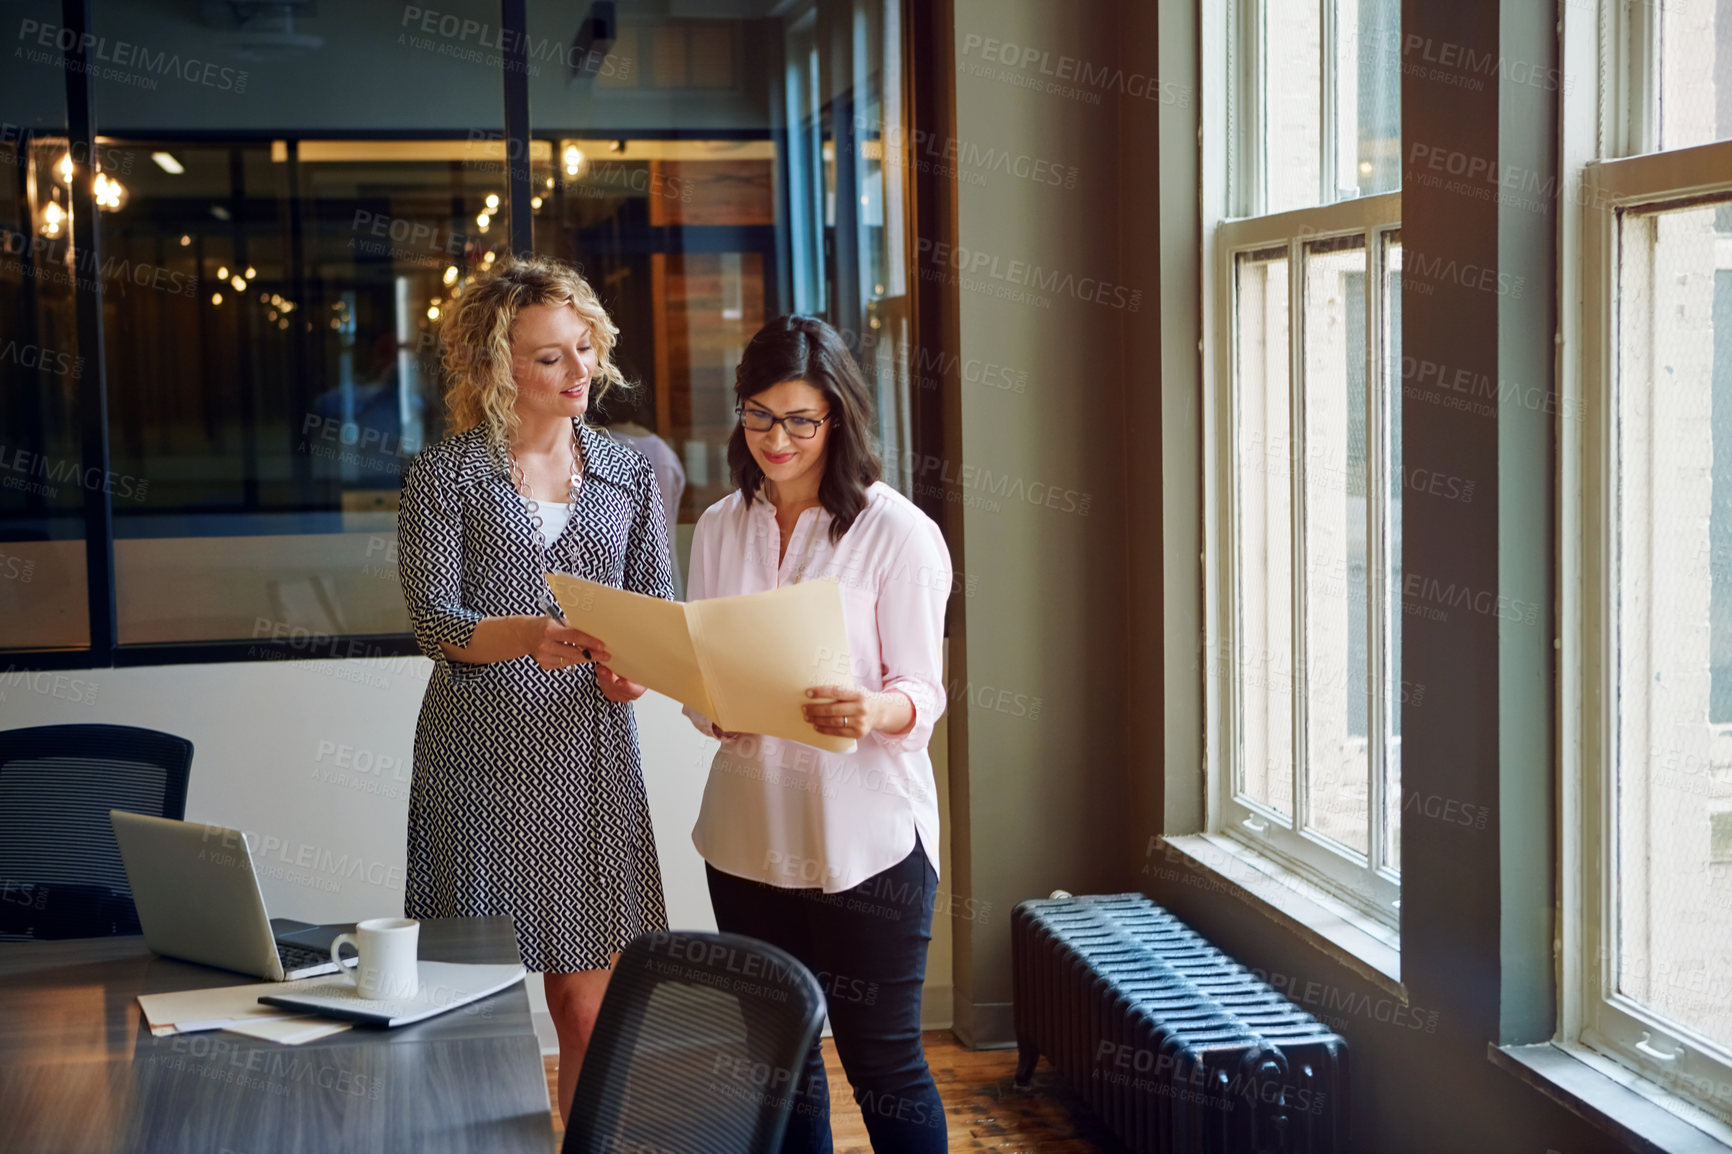 Buy stock photo Shot of two businesswomen talking together over paperwork in an office